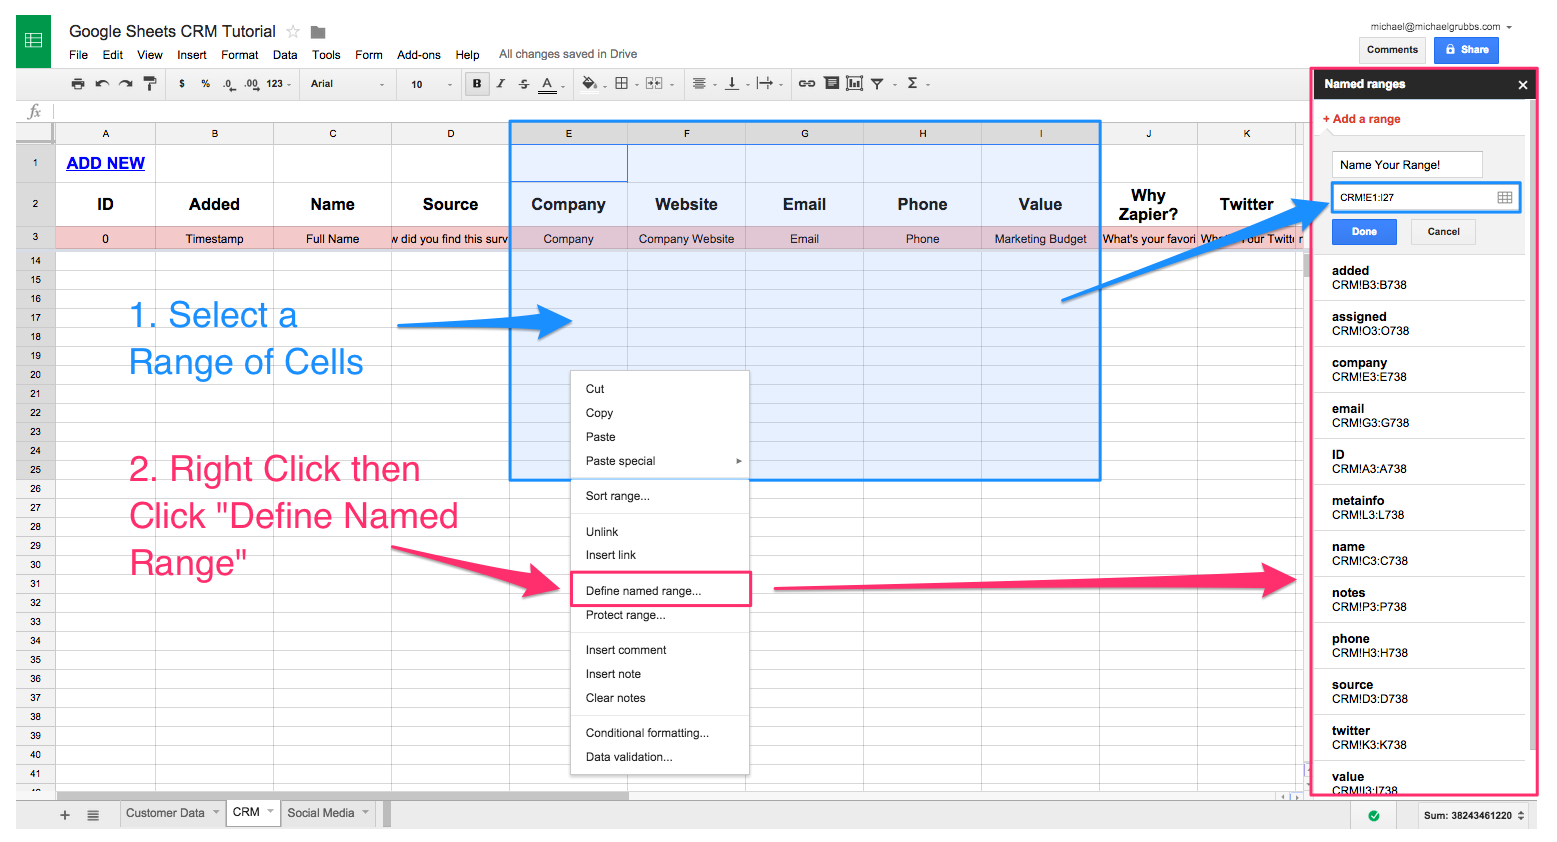 Excel Crm Spreadsheet Regarding Spreadsheet Crm: How To Create A Customizable Crm With Google Sheets